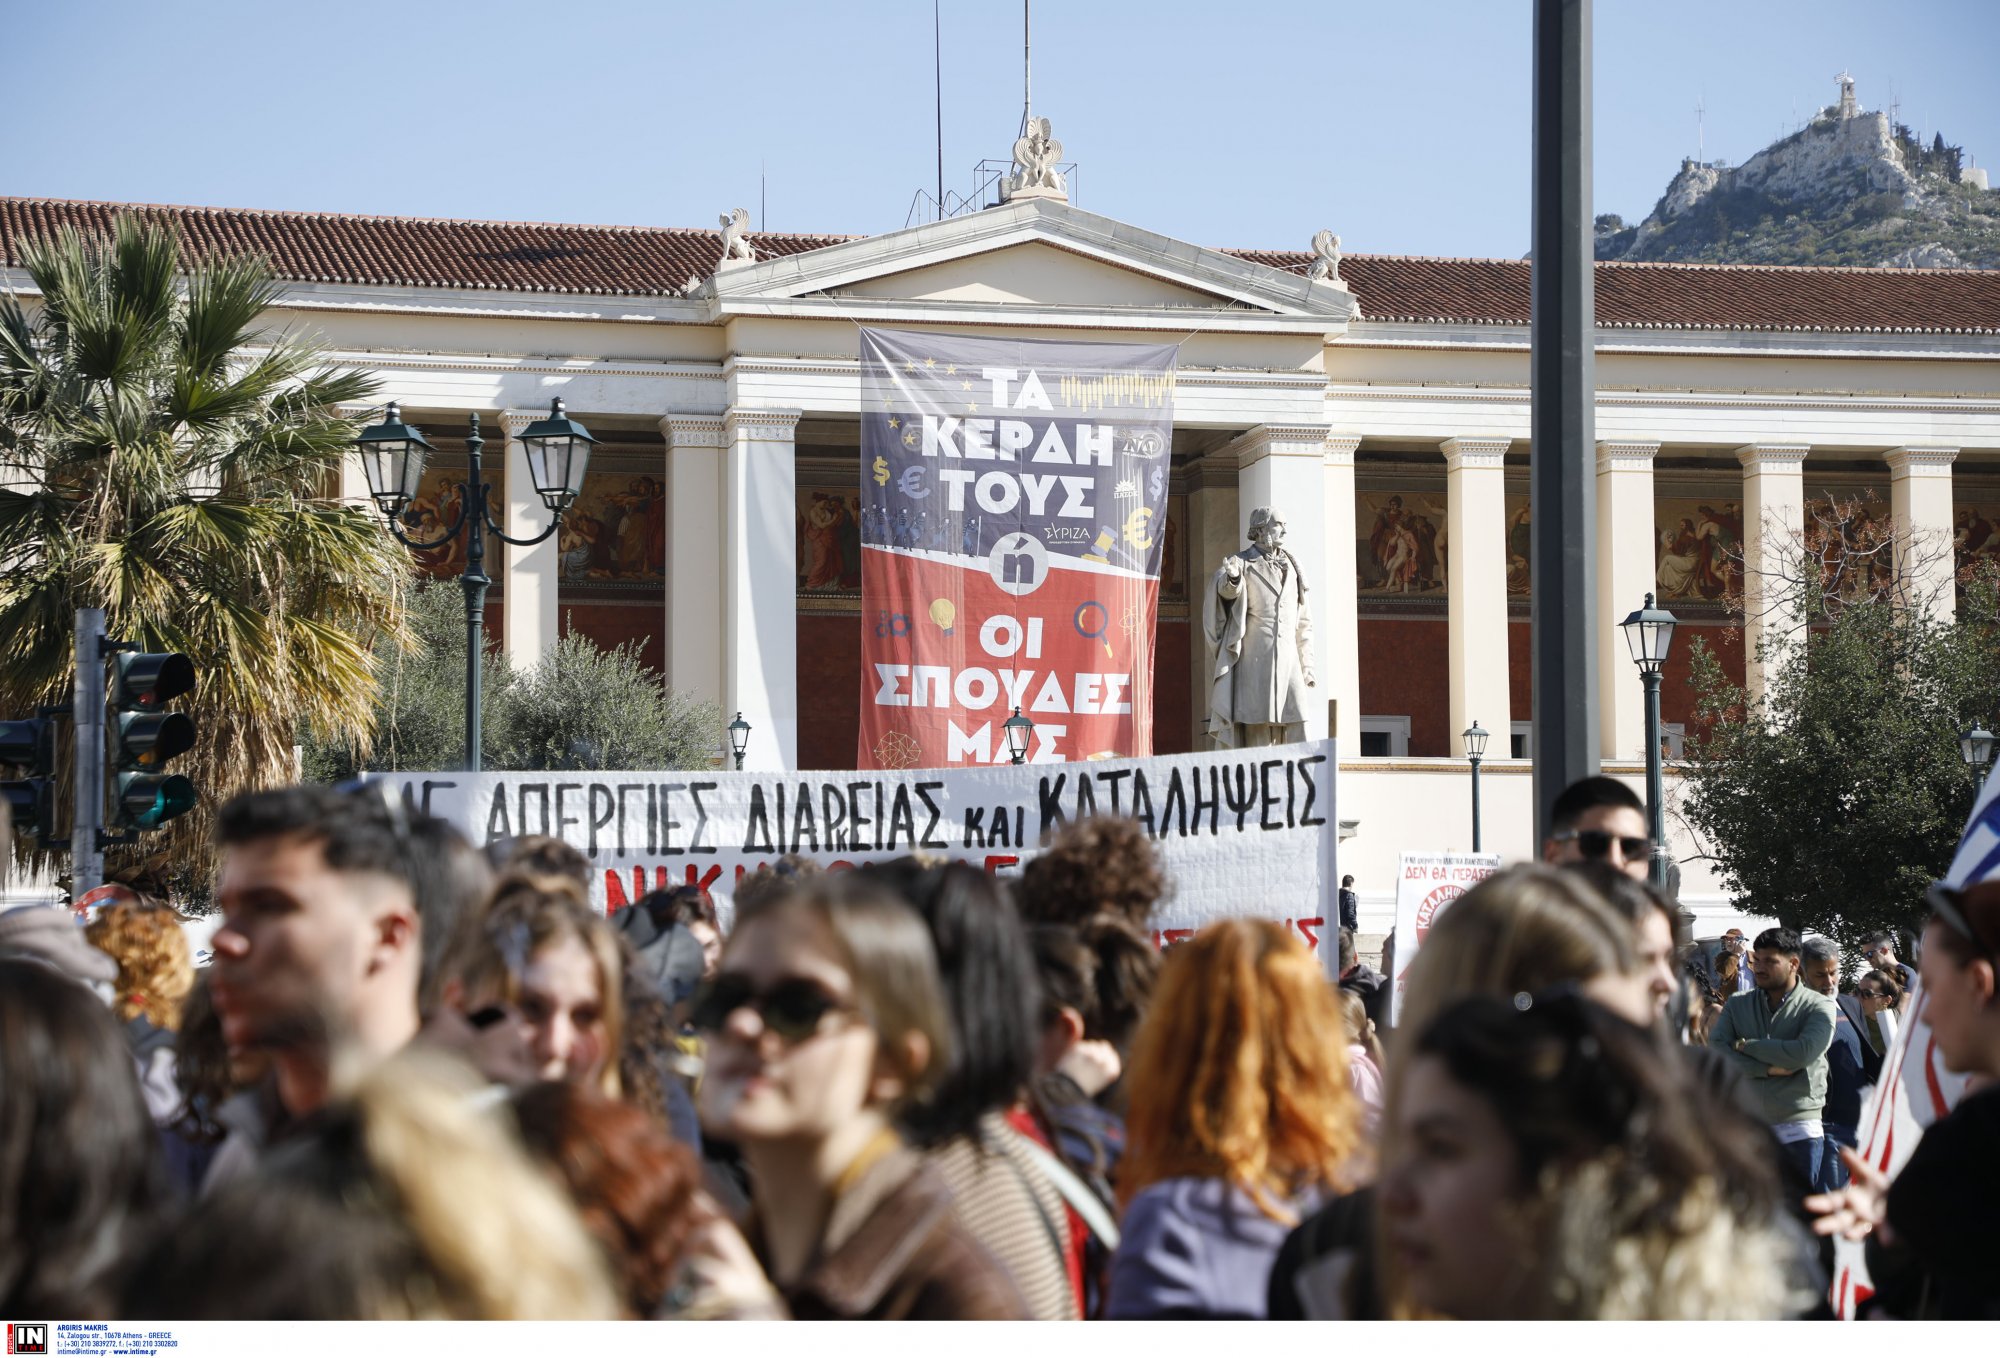 Private Unis in Greece: Student Protest Disrupts Downtown Athens